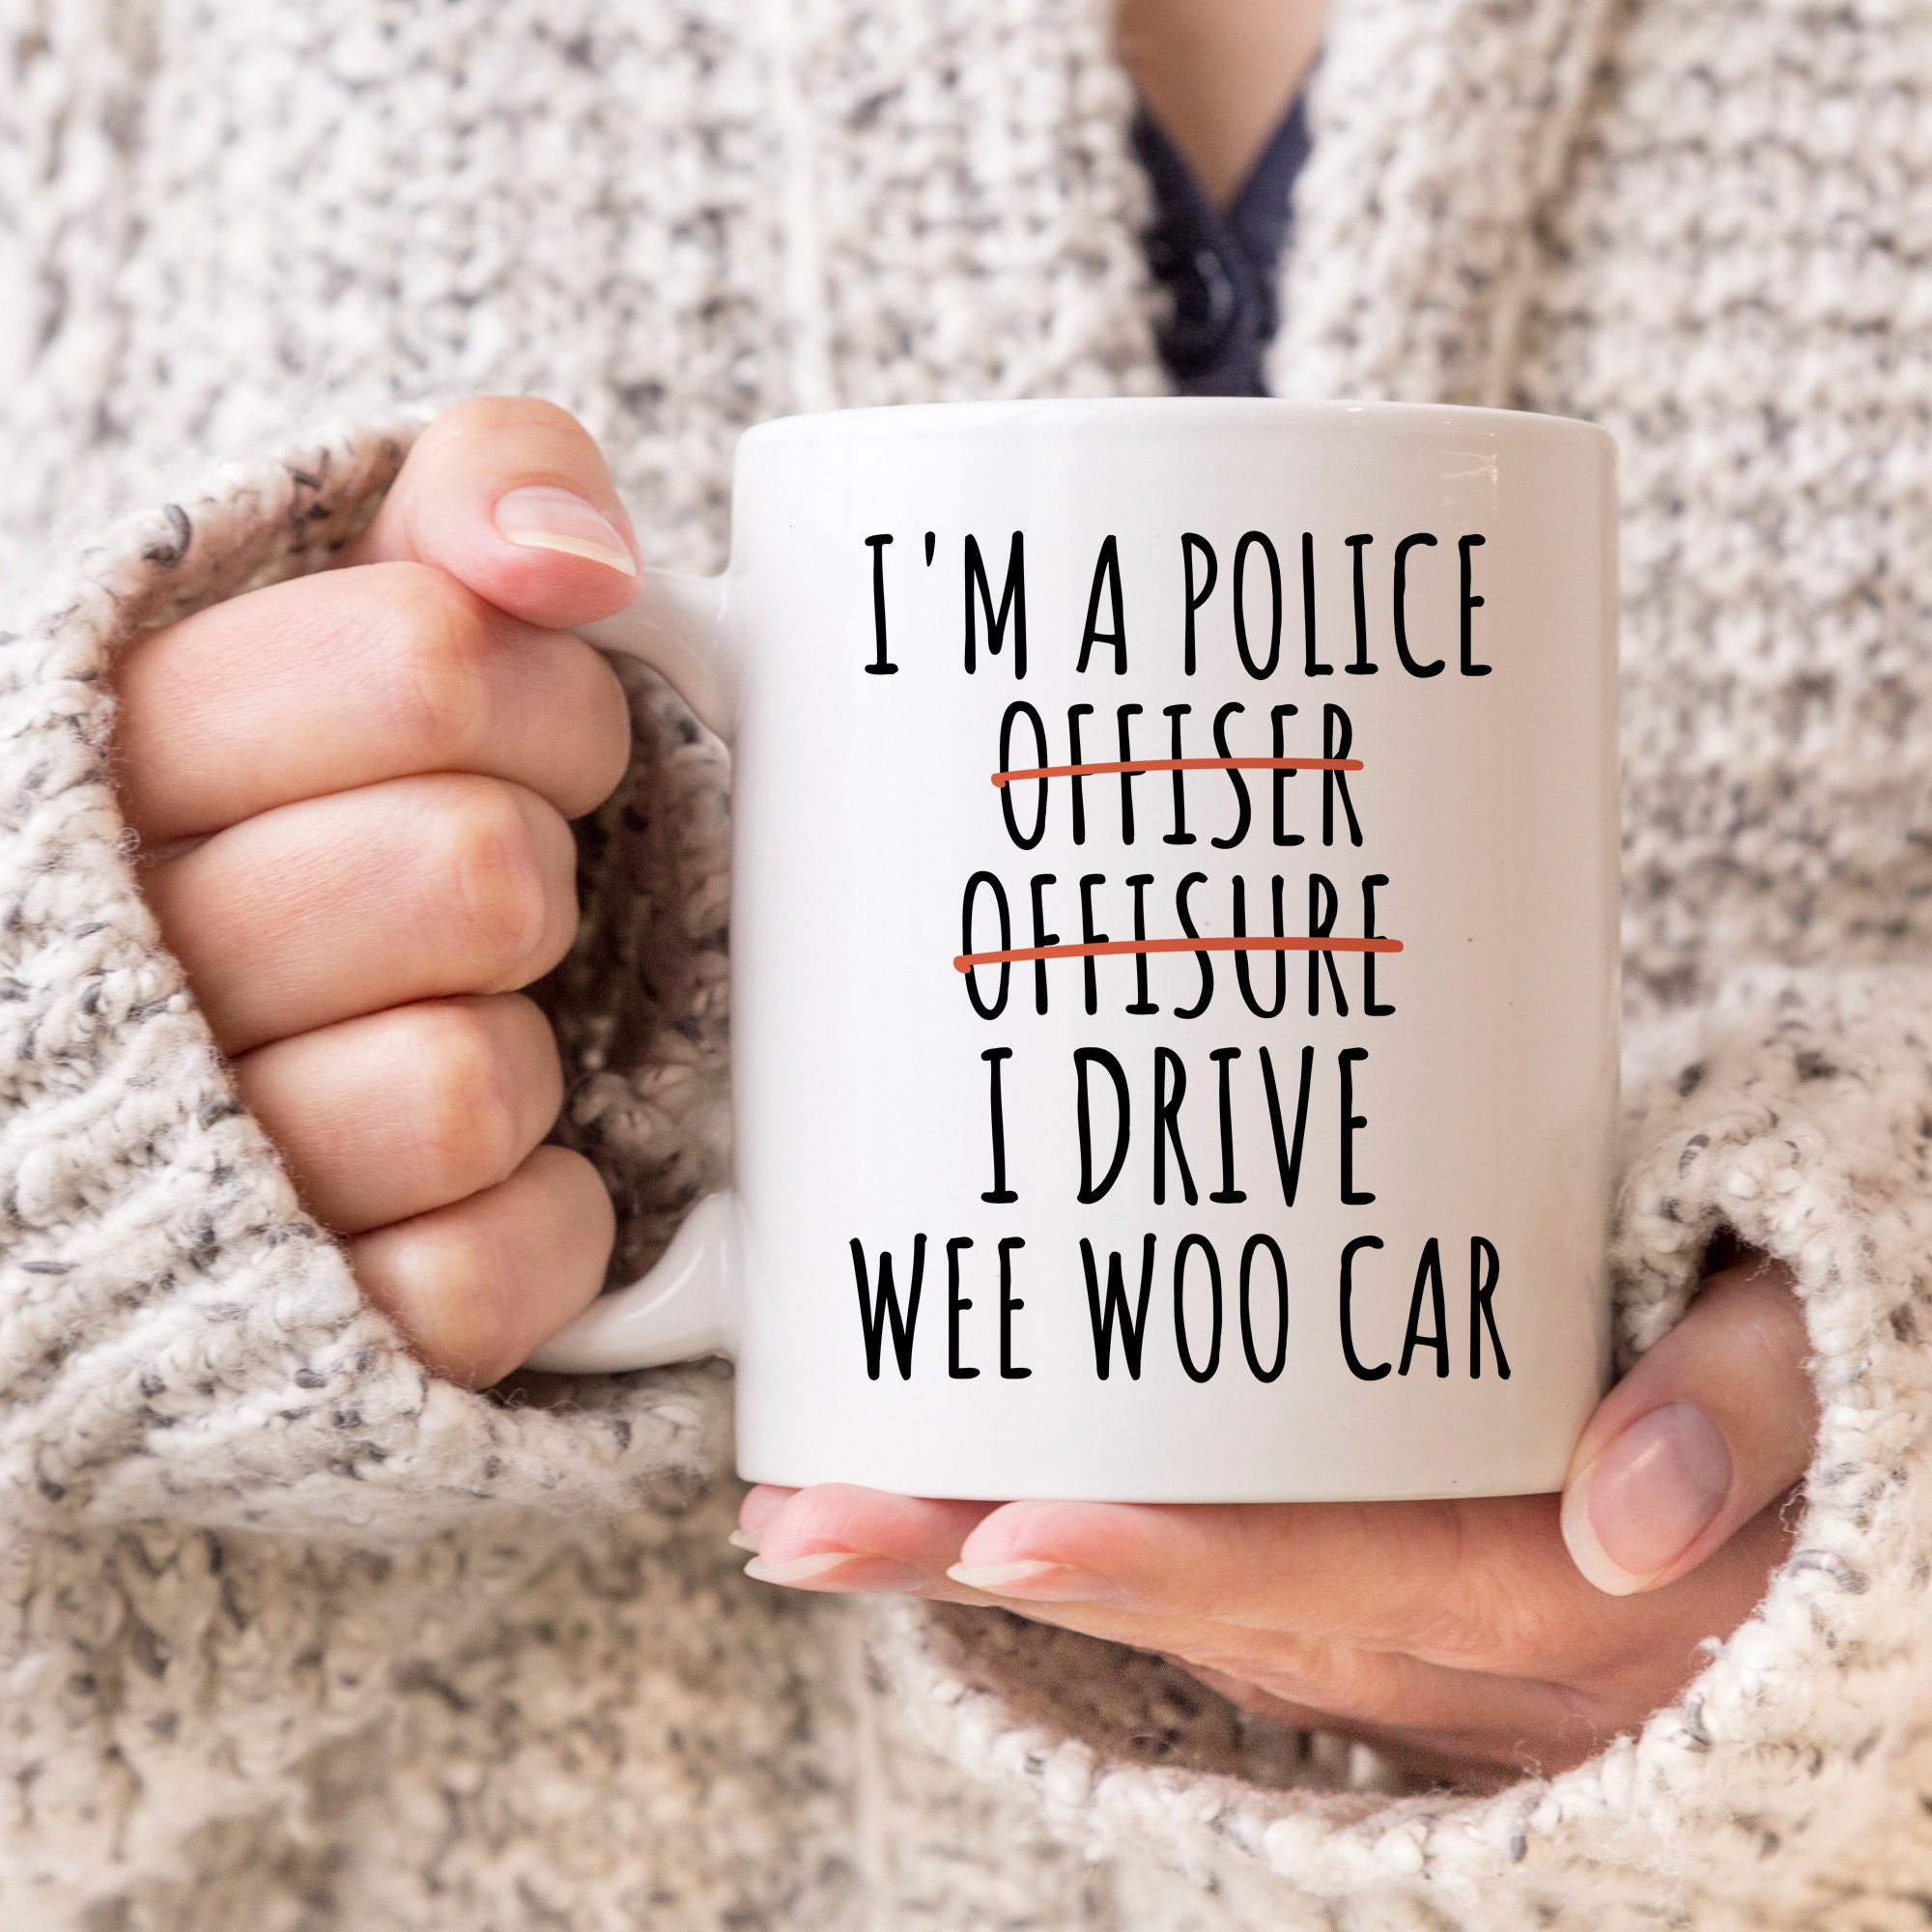 Police Officer Gifts for Police Retirement Gift, Police Graduation Gifts,  Police Chief, Military Police Officer Gifts for Men Women DIGITAL 